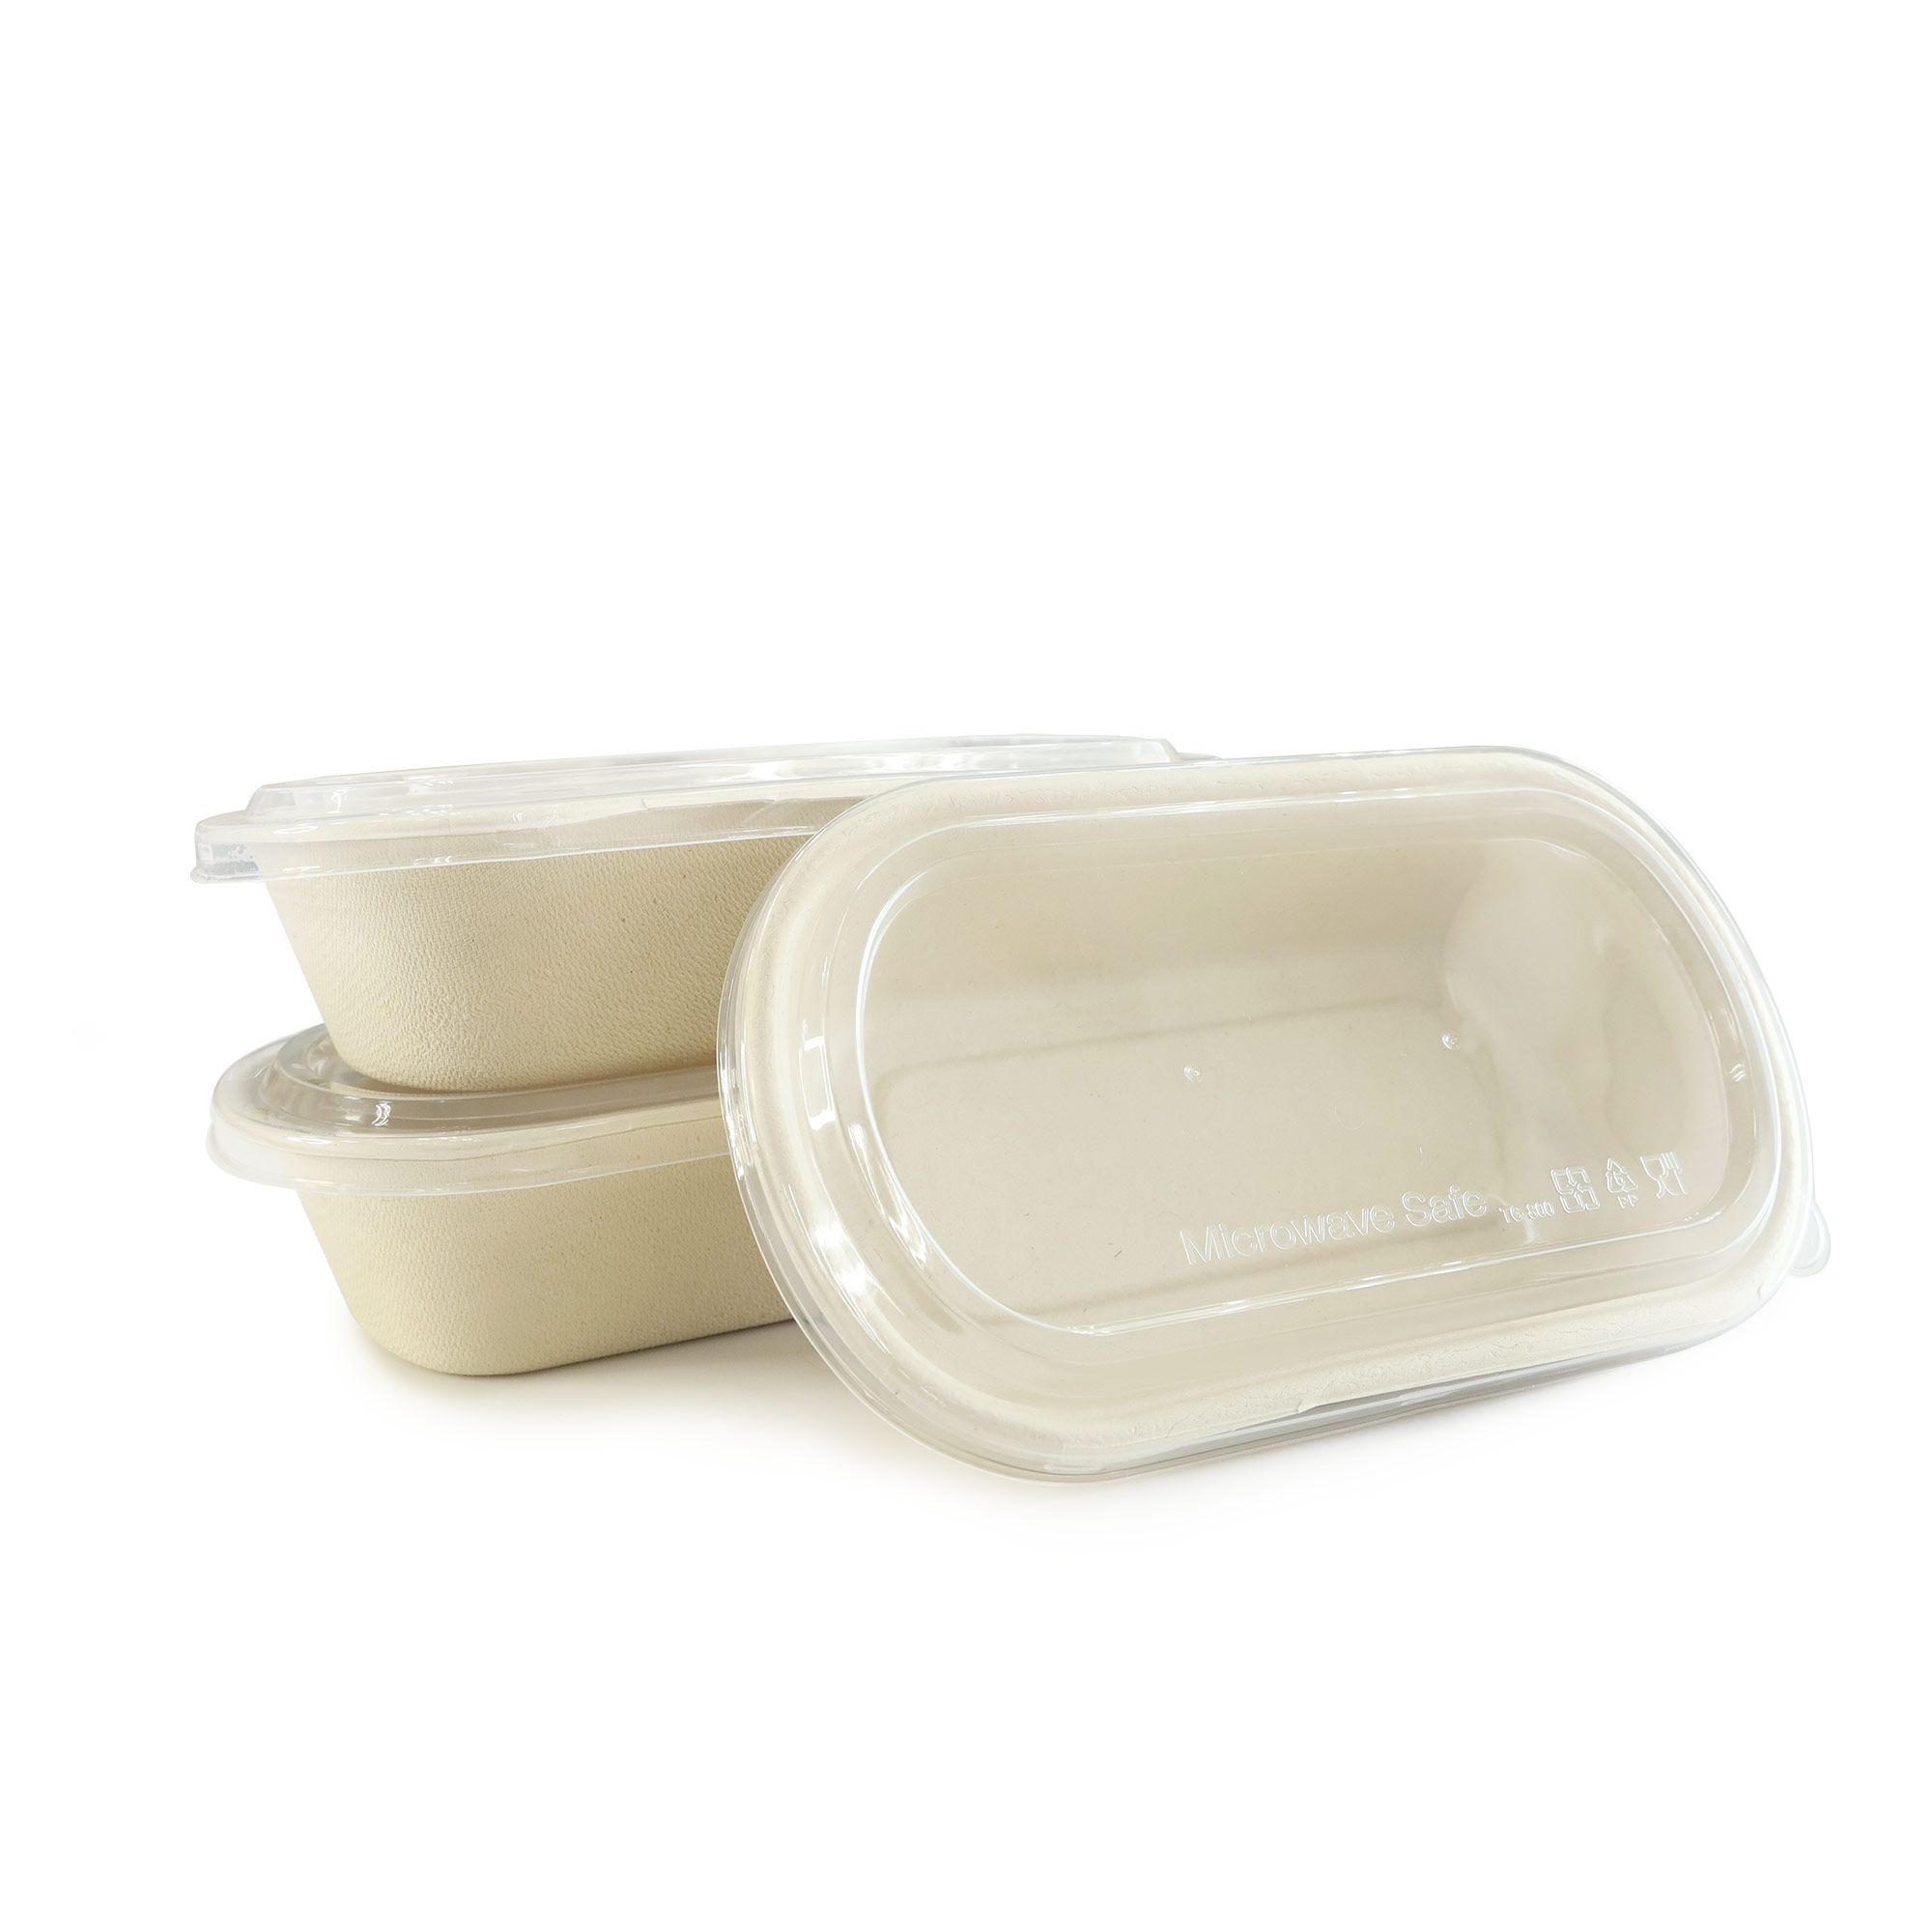 https://cdn.ready-market.com.tw/bac6eec5/Templates/pic/oval-shaped-single-grid-bagasse-lunch-container-with-transparent-lid-1.jpg?v=e791975d